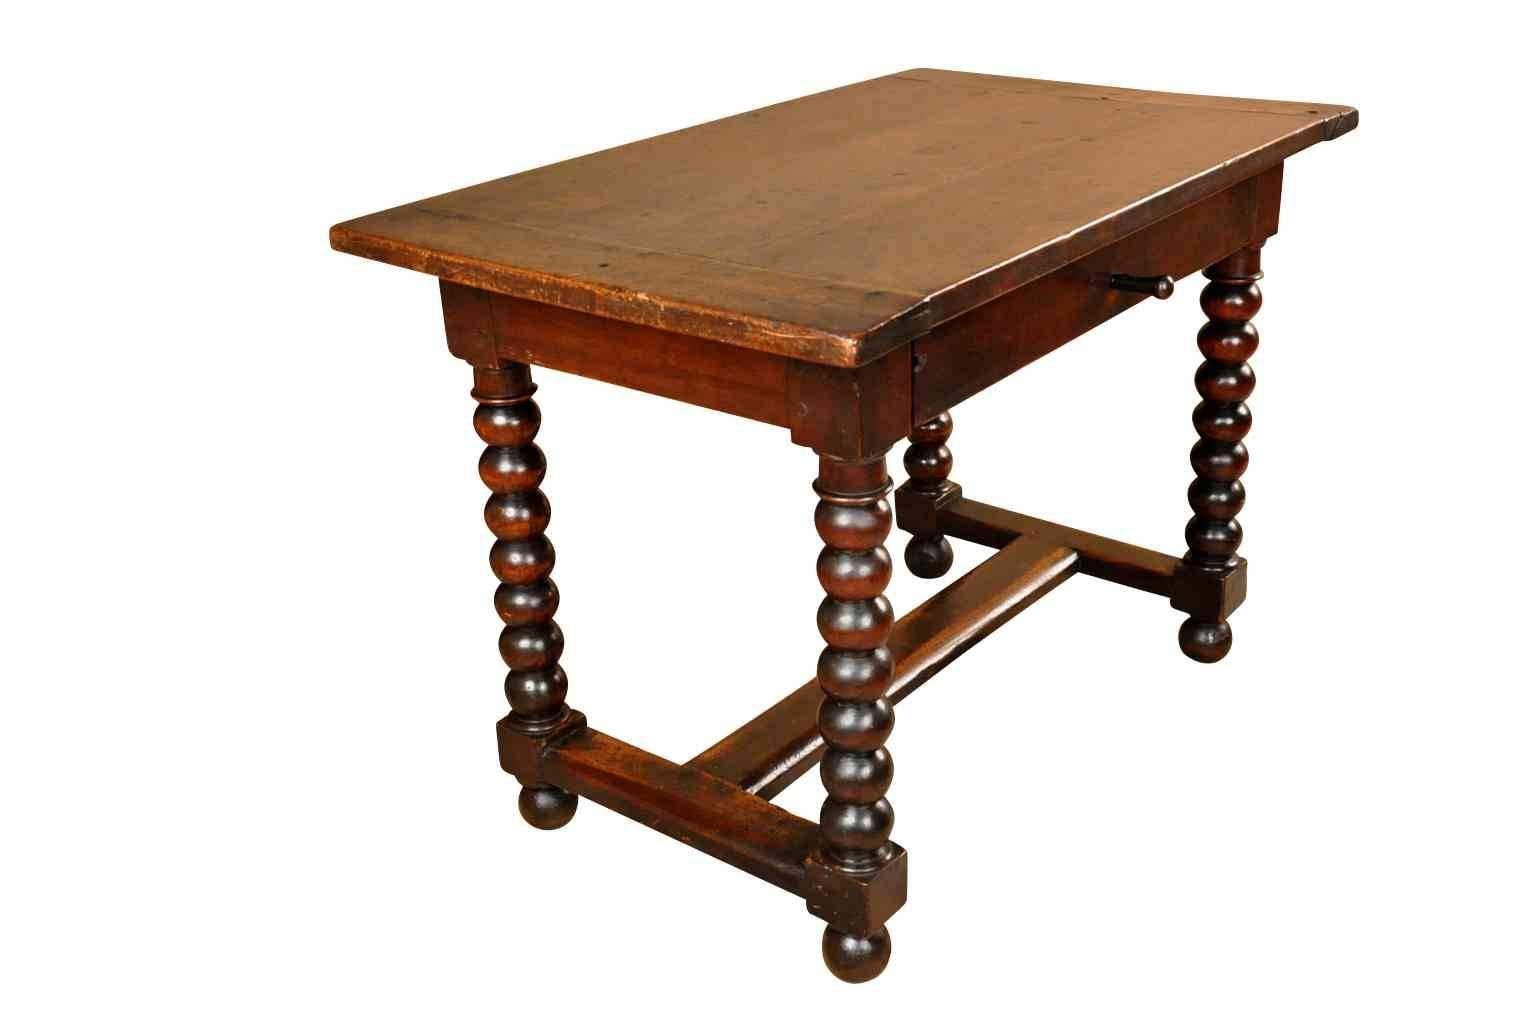 A very handsome French Louis XIII style side table or writing table. Beautifully constructed from walnut with boldly turned legs and a single drawer. The patina is very rich and luminous.